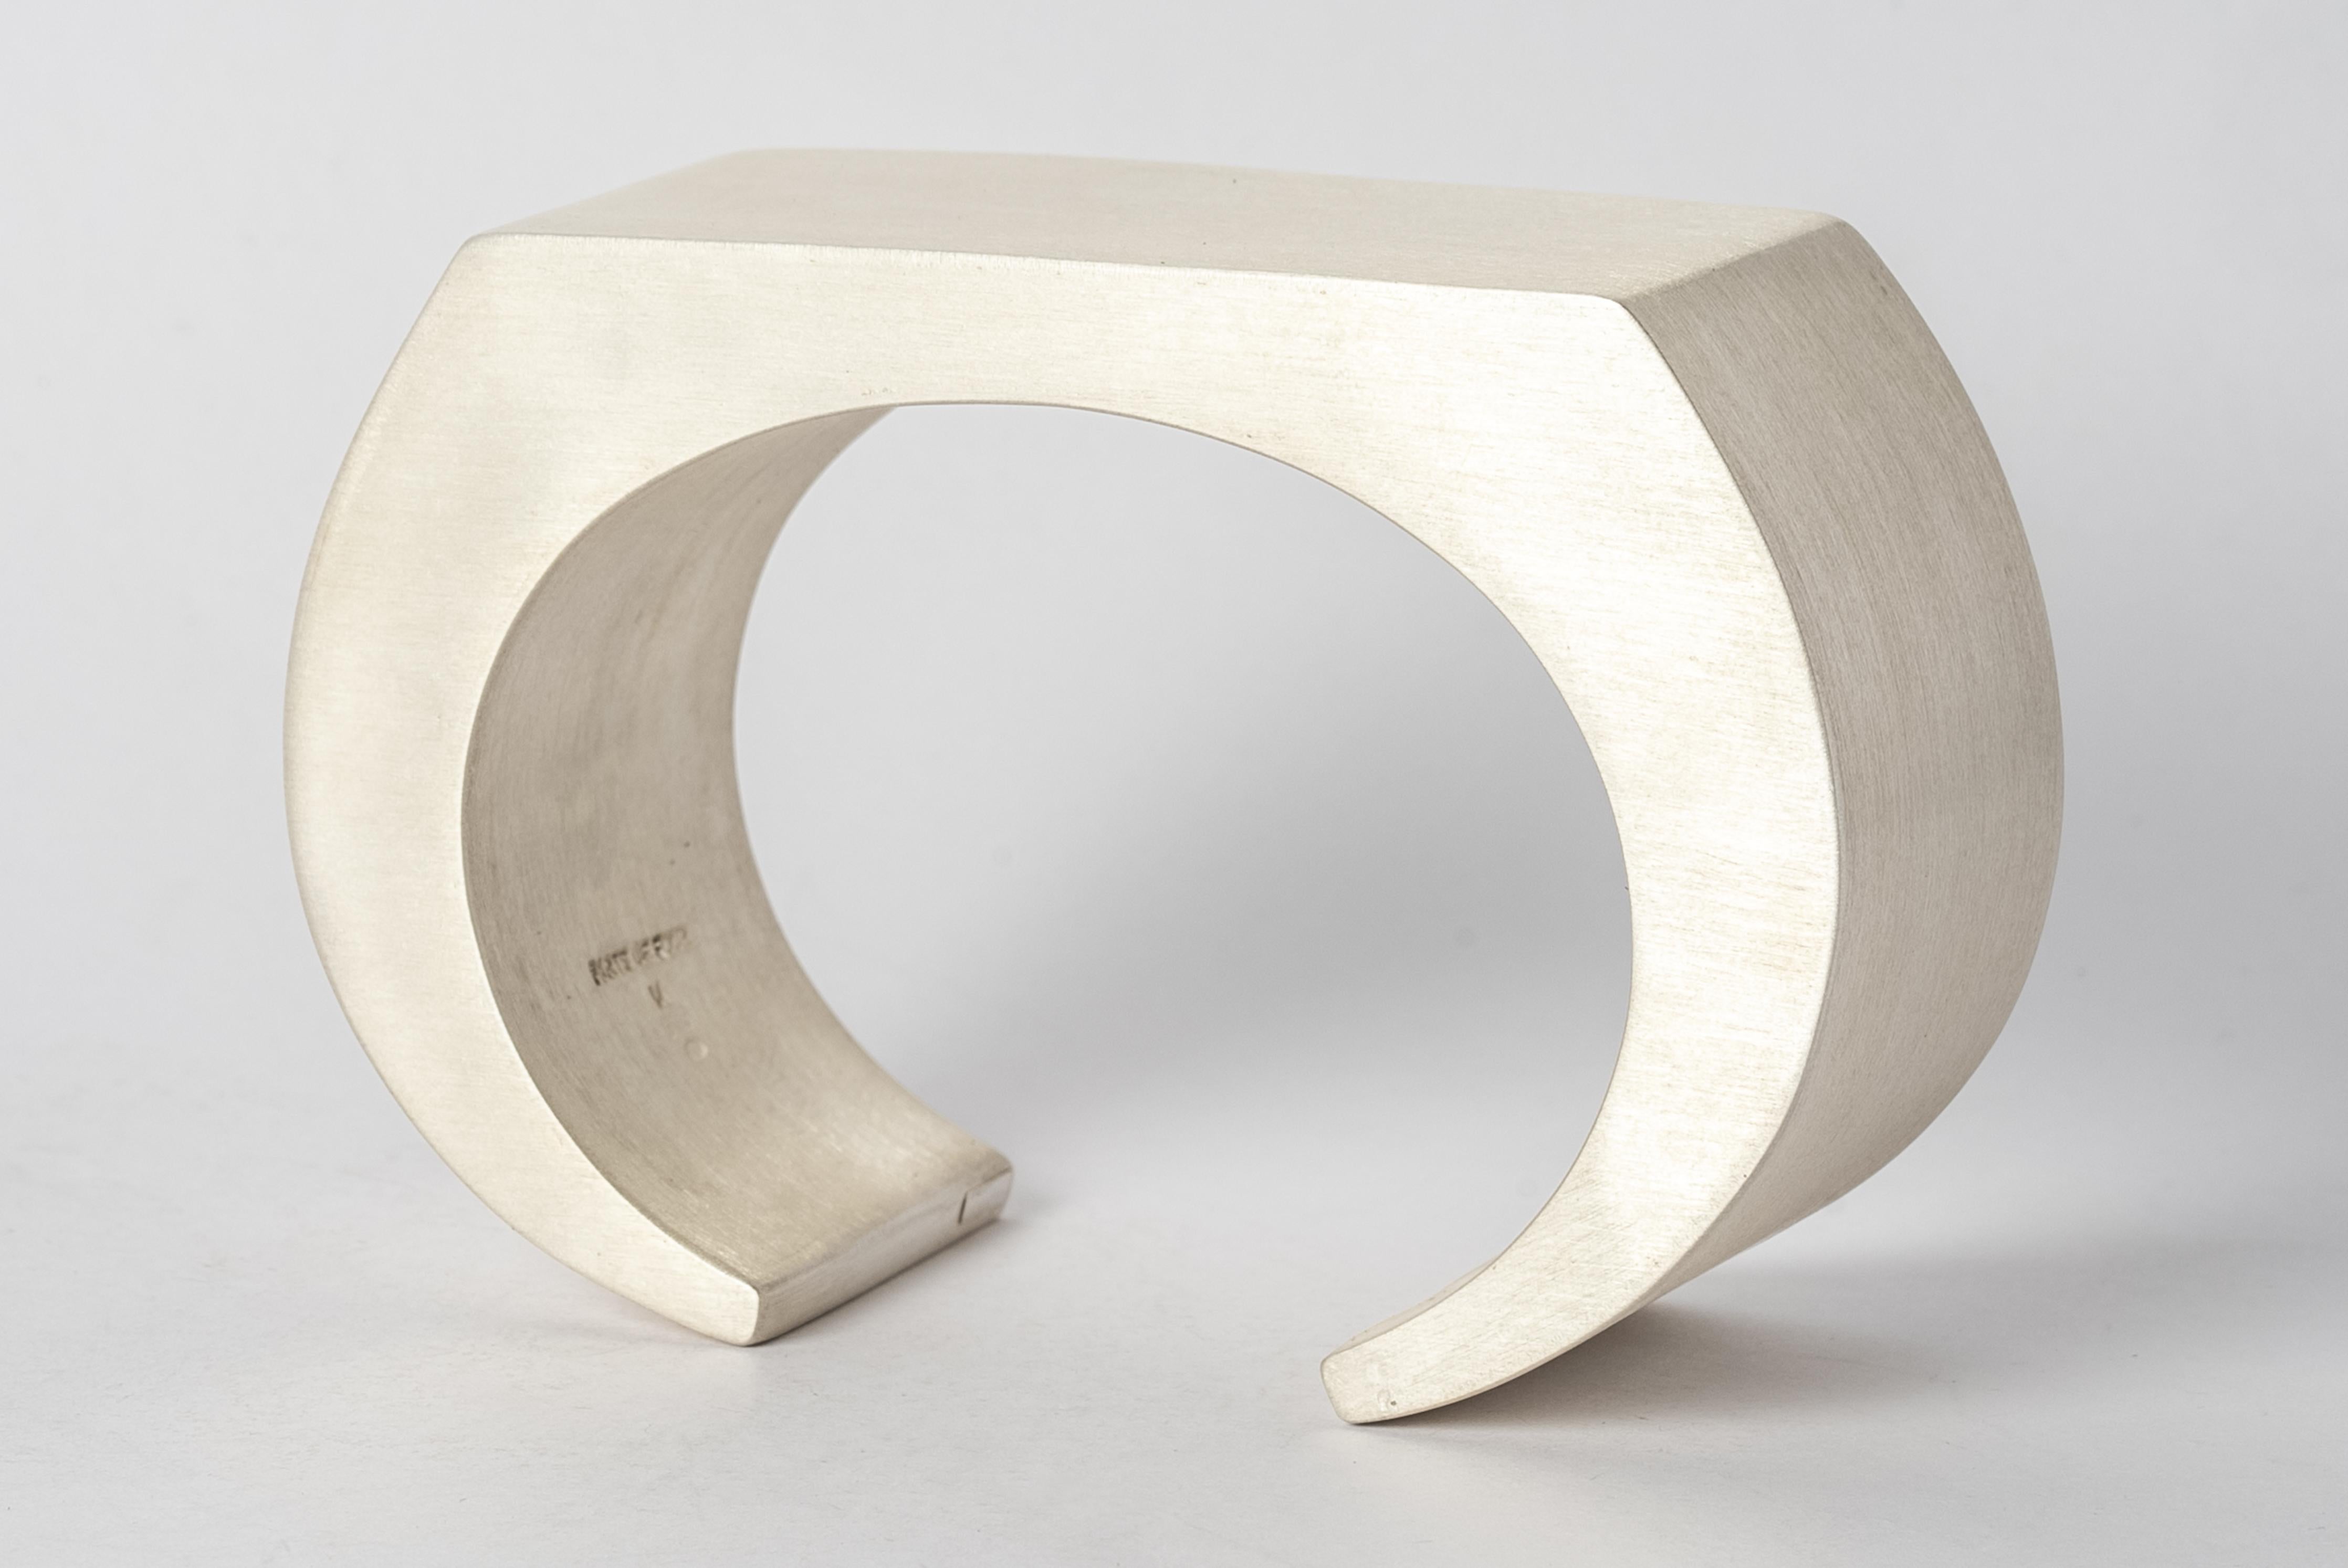 Bracelet in sterling silver. This piece is 100% hand fabricated from metal plate; cut into sections and soldered together to make the hollow three dimensional form.
Dimensions Bracelet Top (WxL): 30 mm × 55 mm.